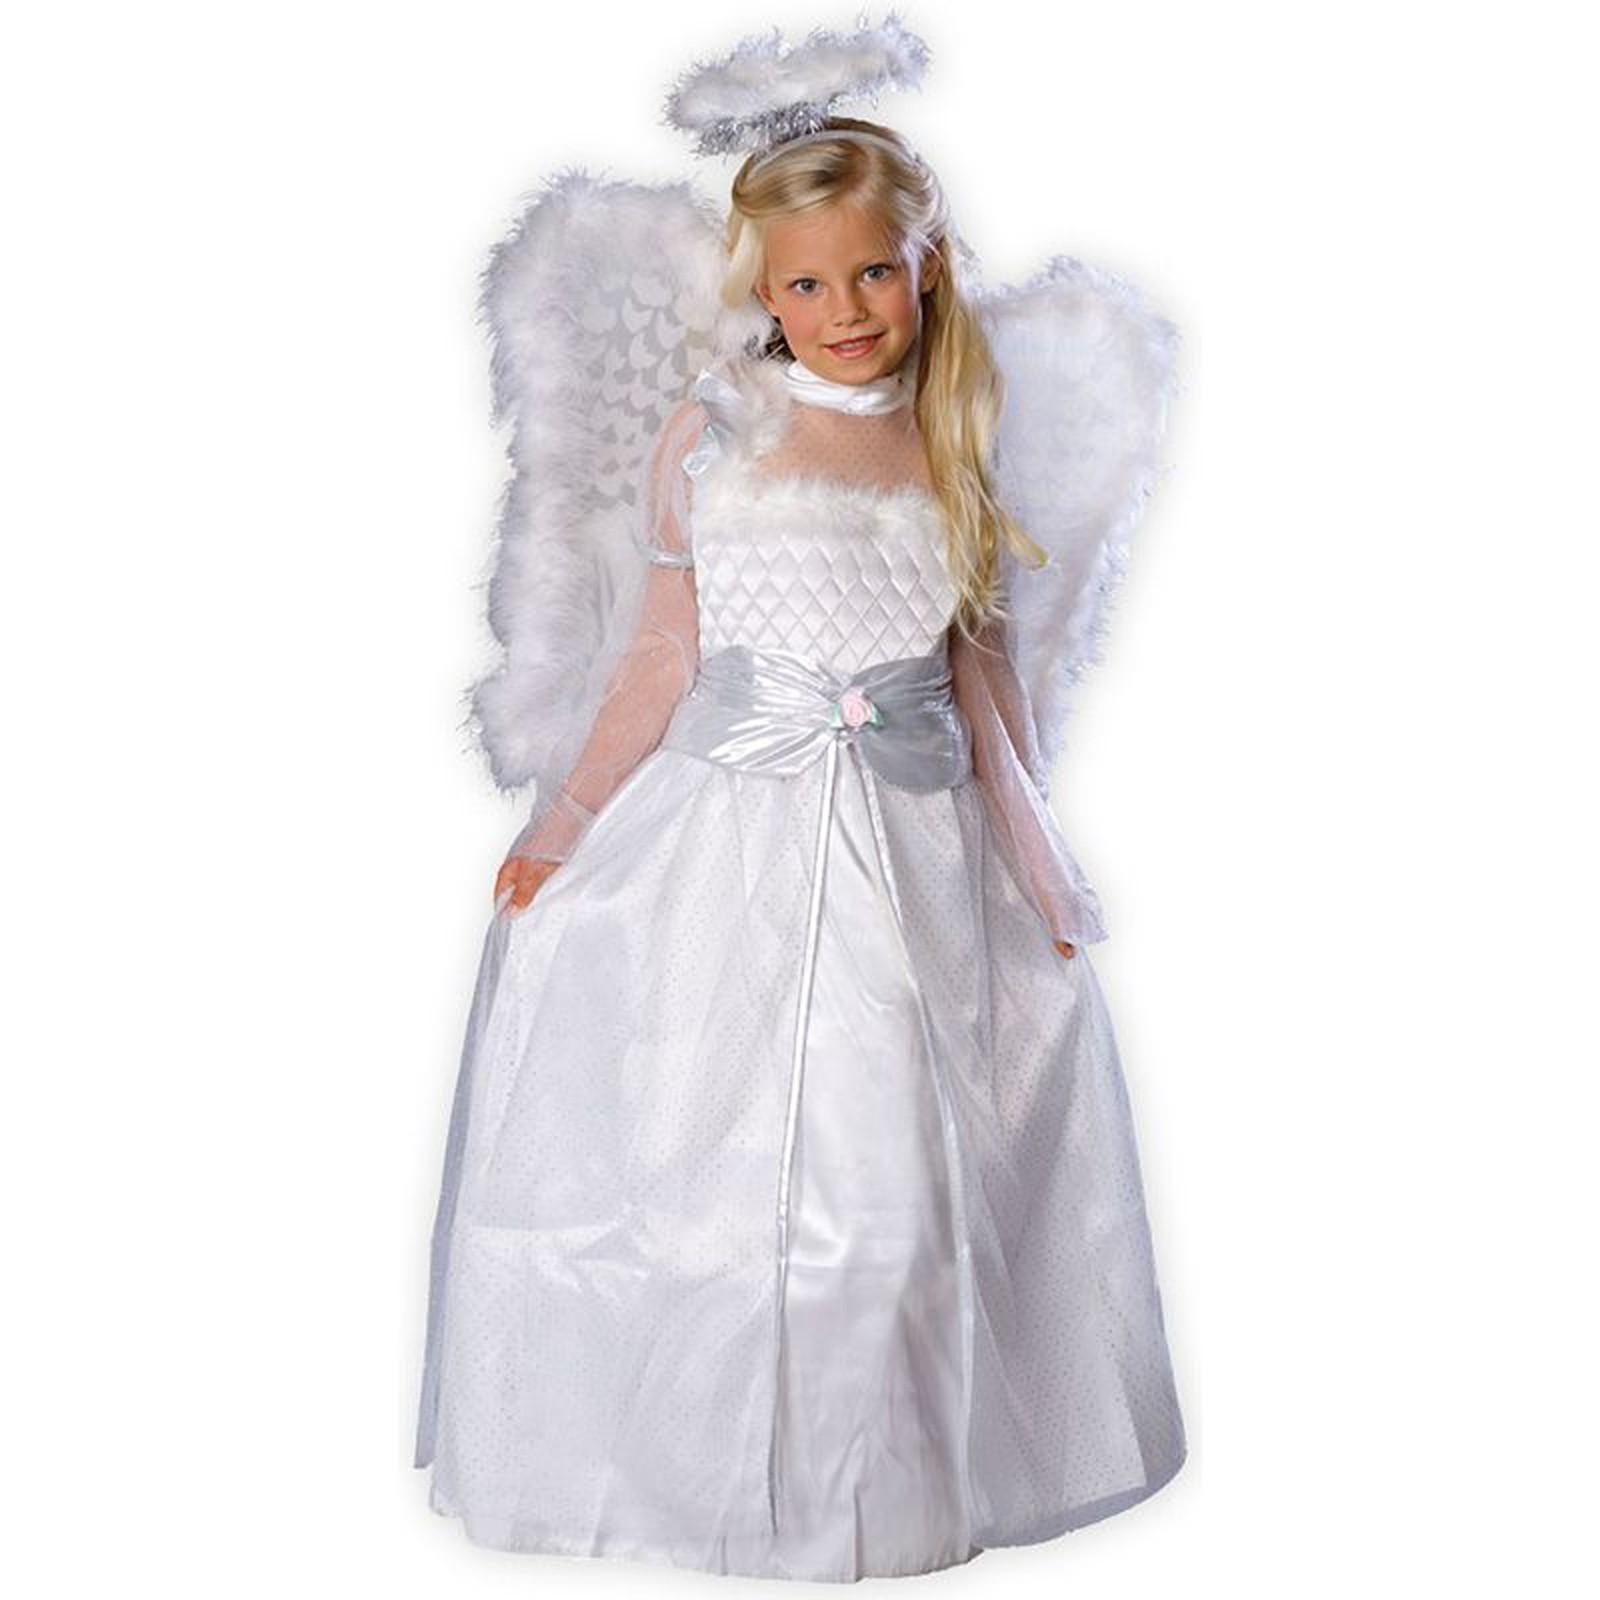 Heavenly Angel Halloween Costumes Dazzle Everyone At The Party